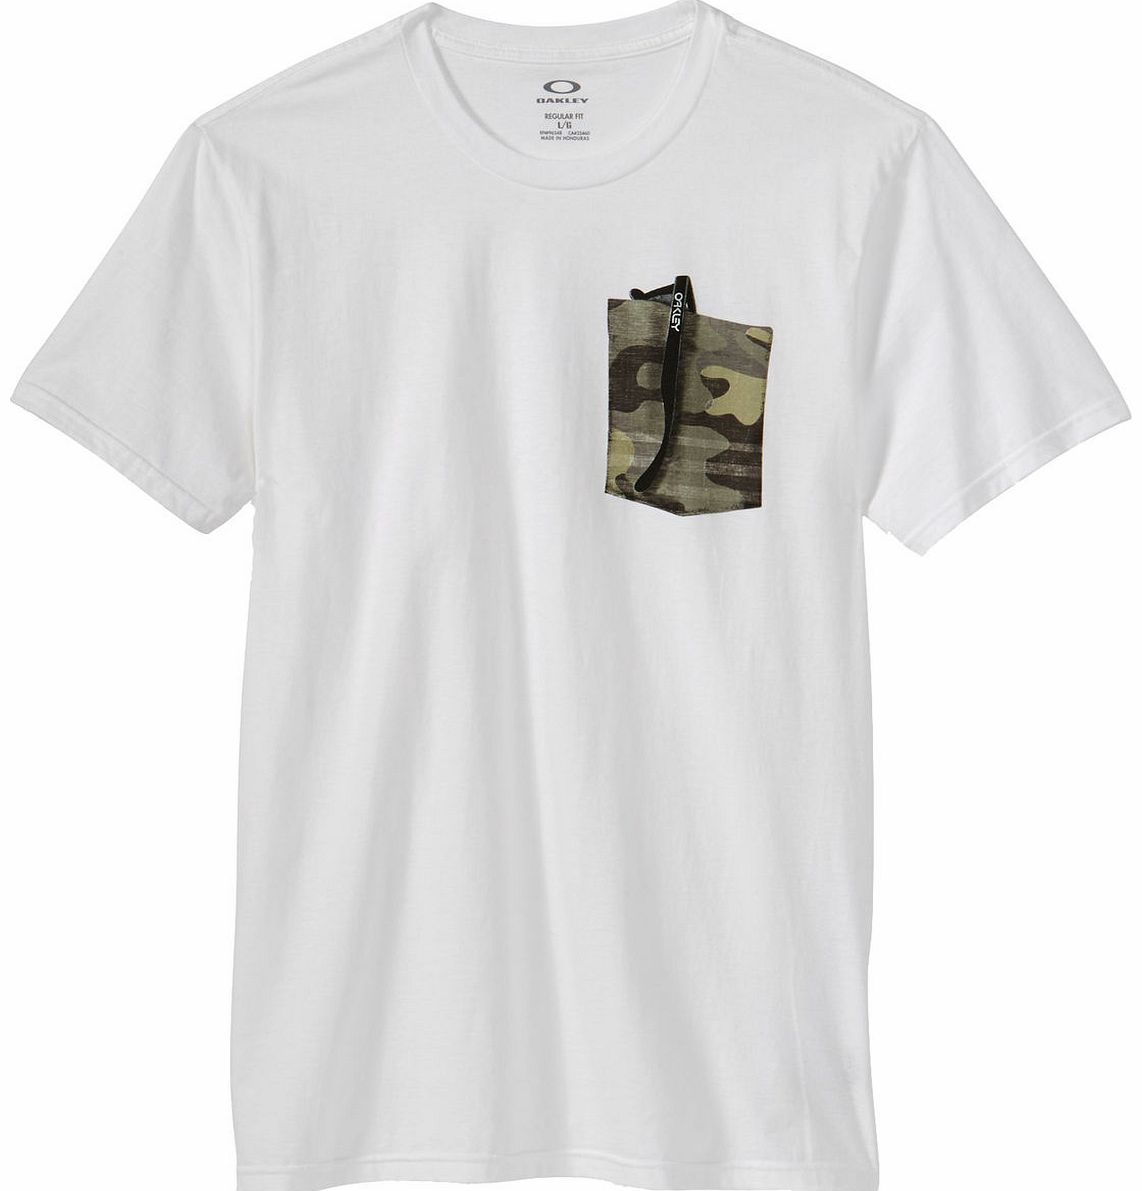 Oakley Shades In A Pocket Tee T-shirts